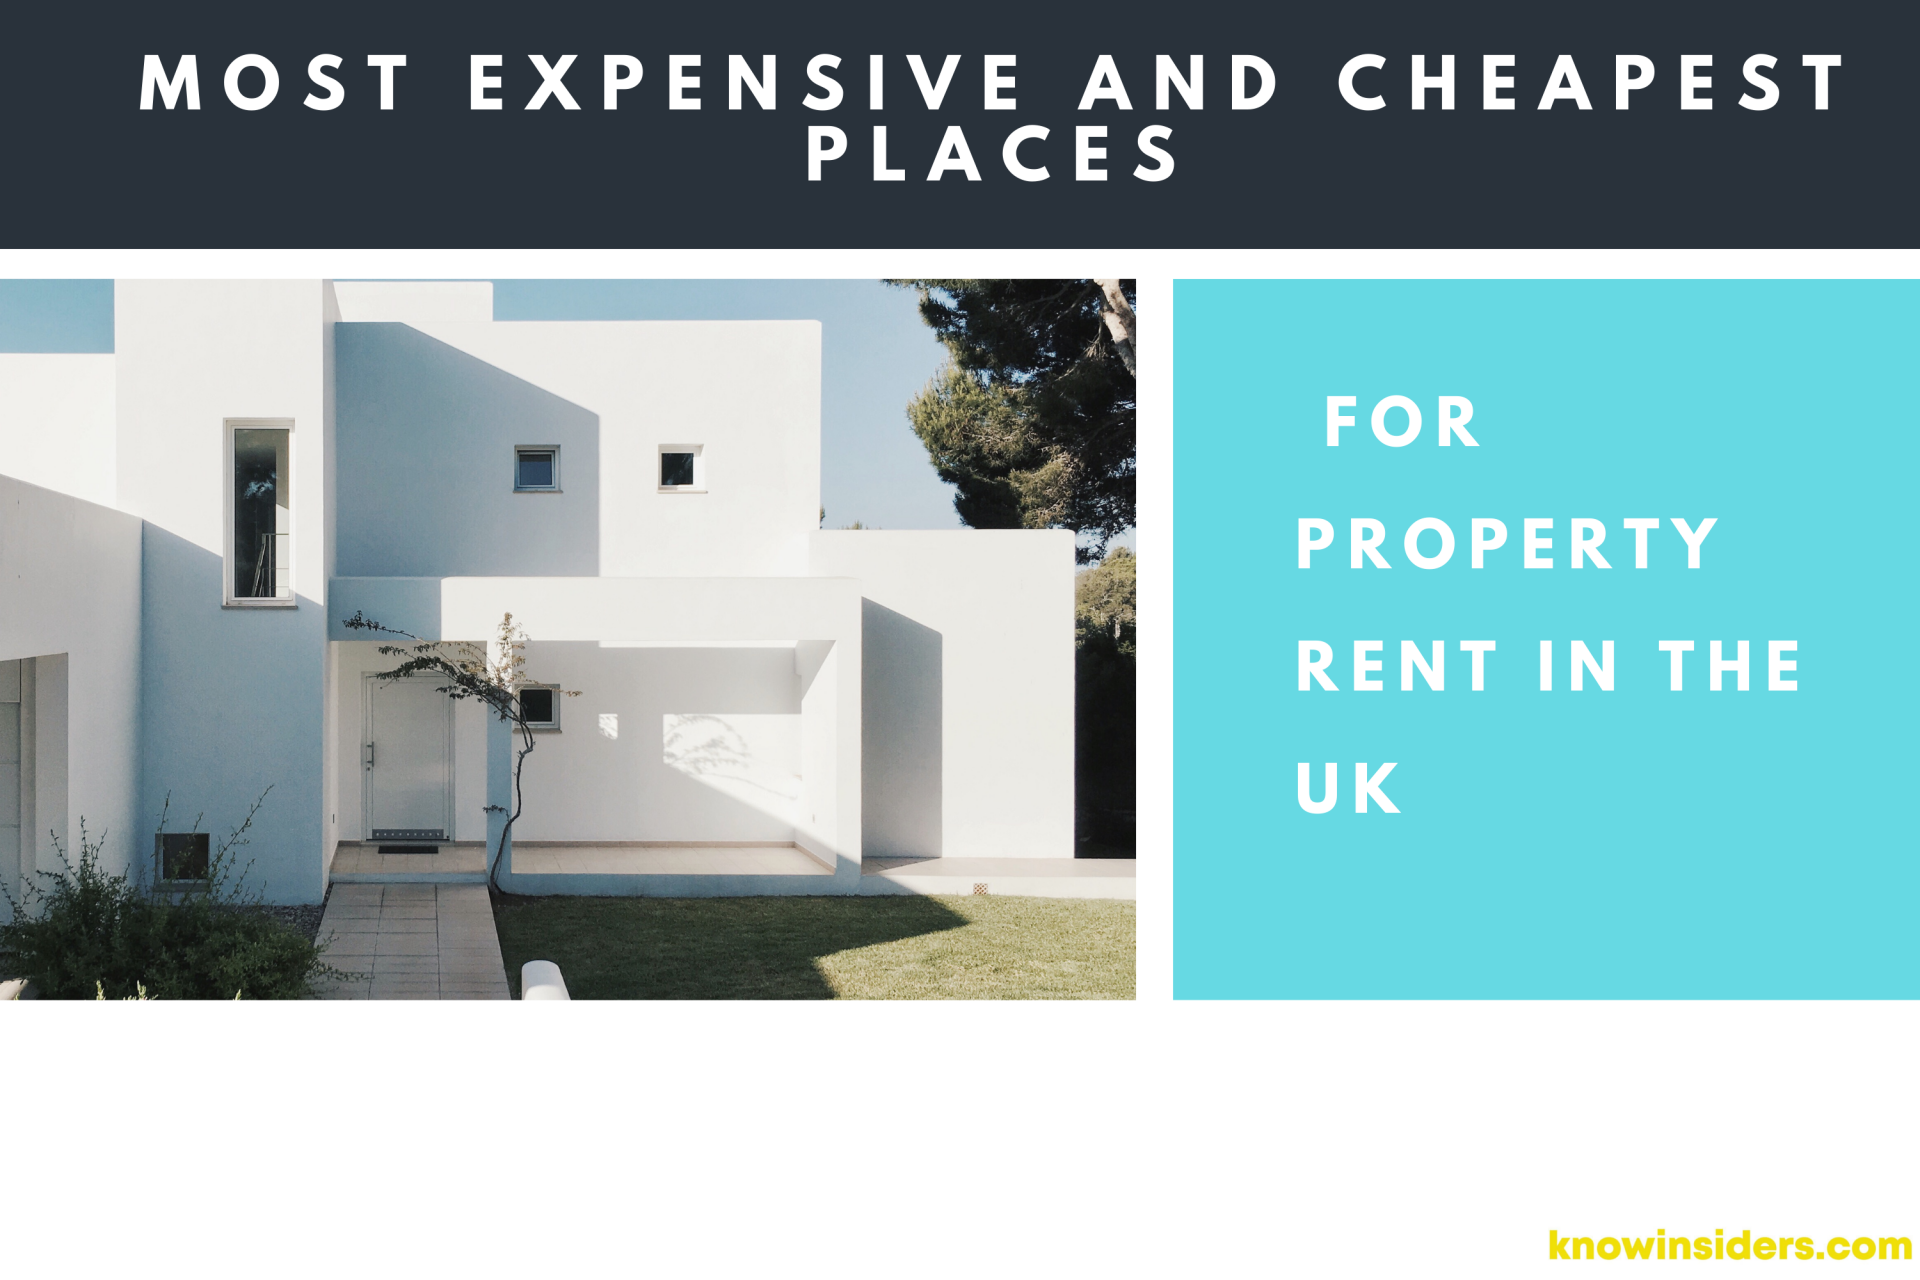 Most Expensive And Cheapest Places For Property Rents In The UK